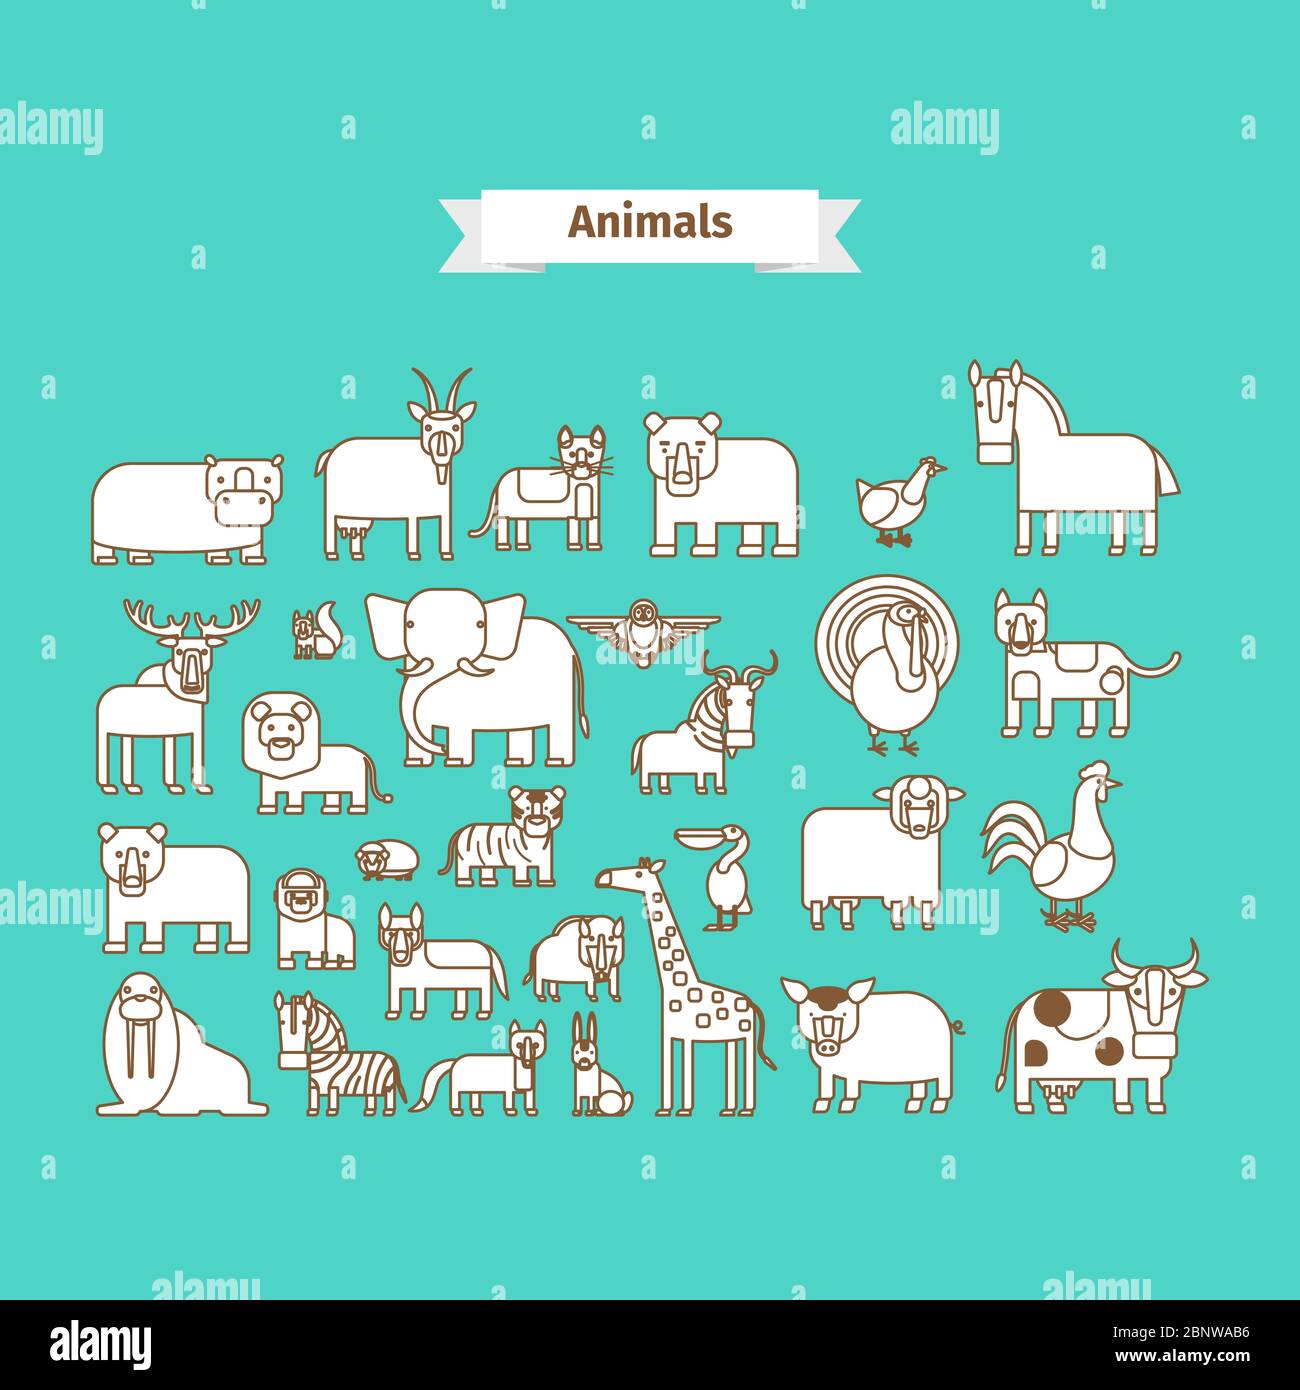 Animals Line Art Vector white Icons on blue background Stock Vector